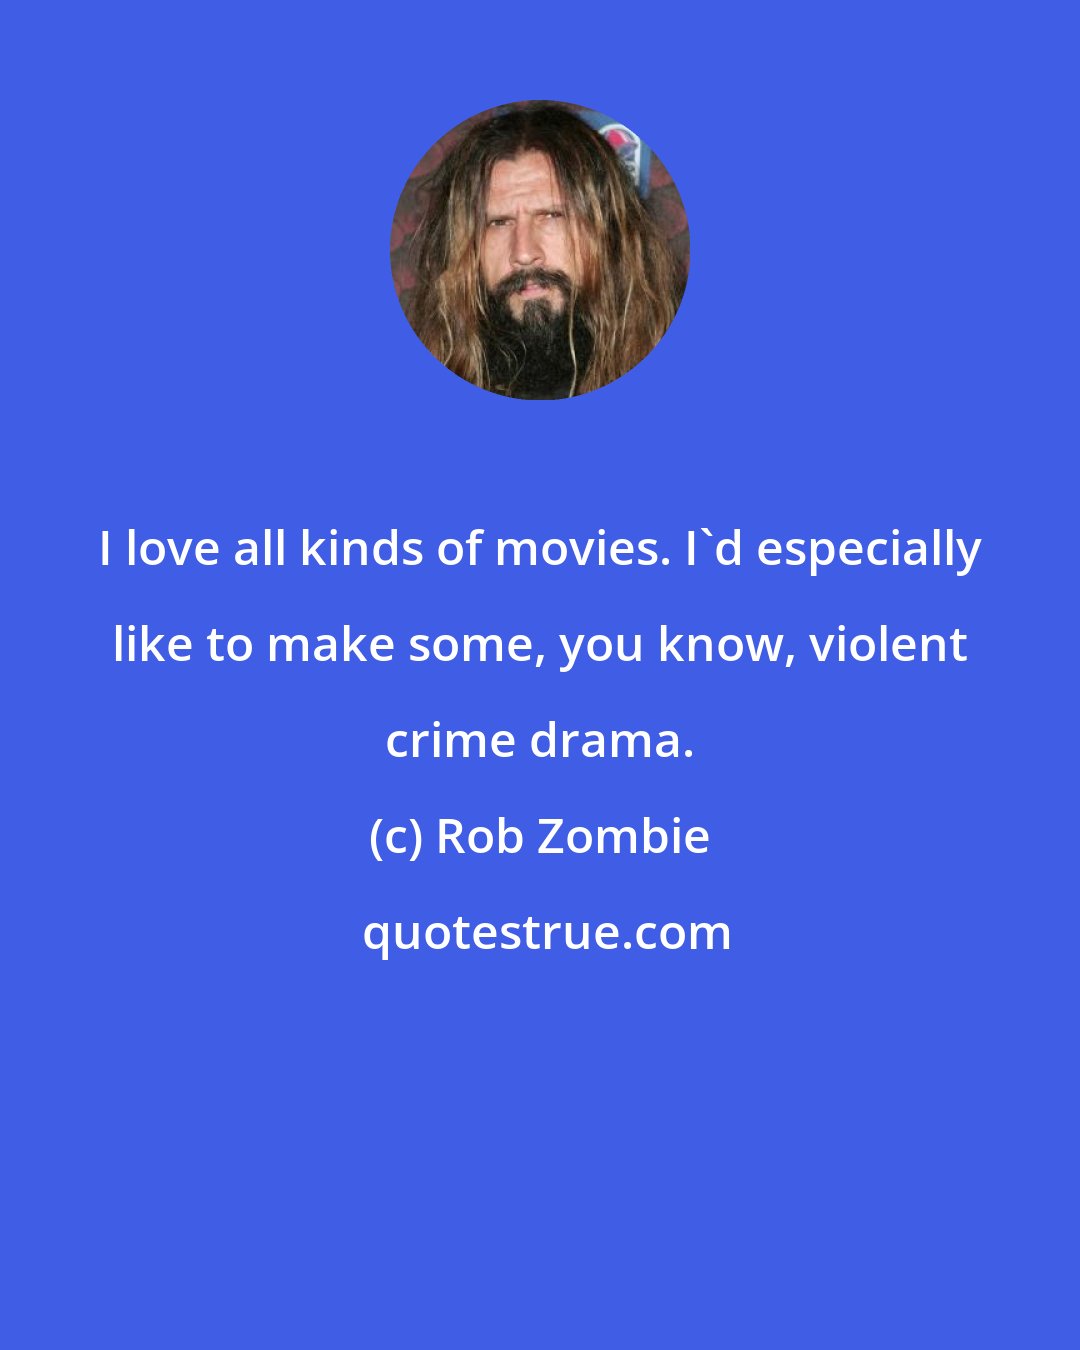 Rob Zombie: I love all kinds of movies. I'd especially like to make some, you know, violent crime drama.